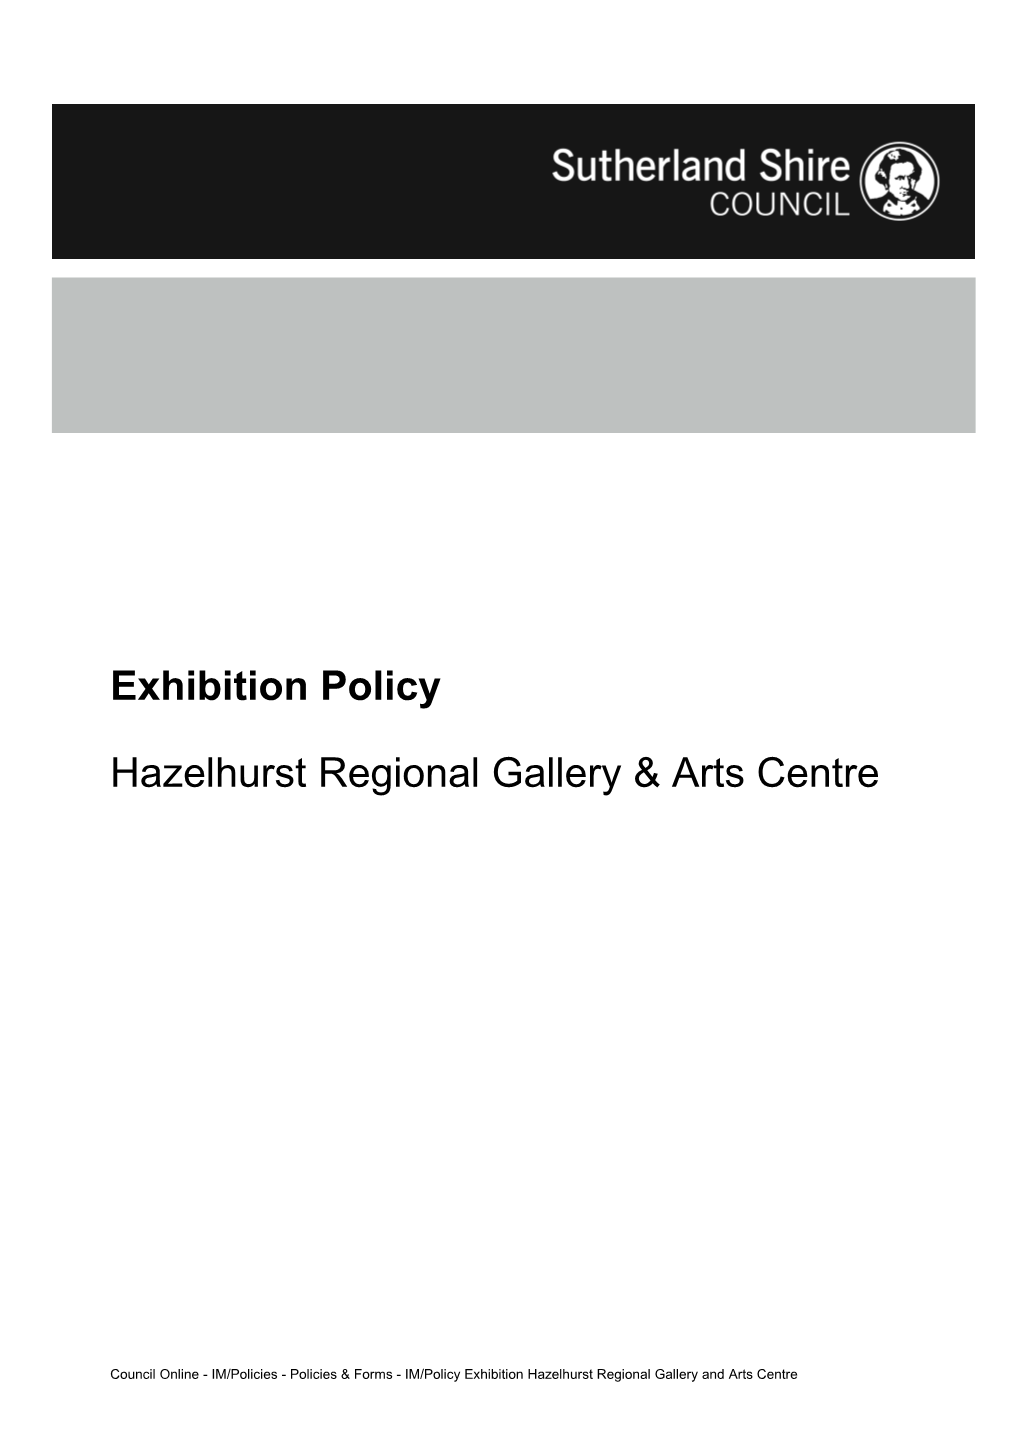 Policy Exhibition Policy for the Hazelhurst Regional Gallery & Arts Centre